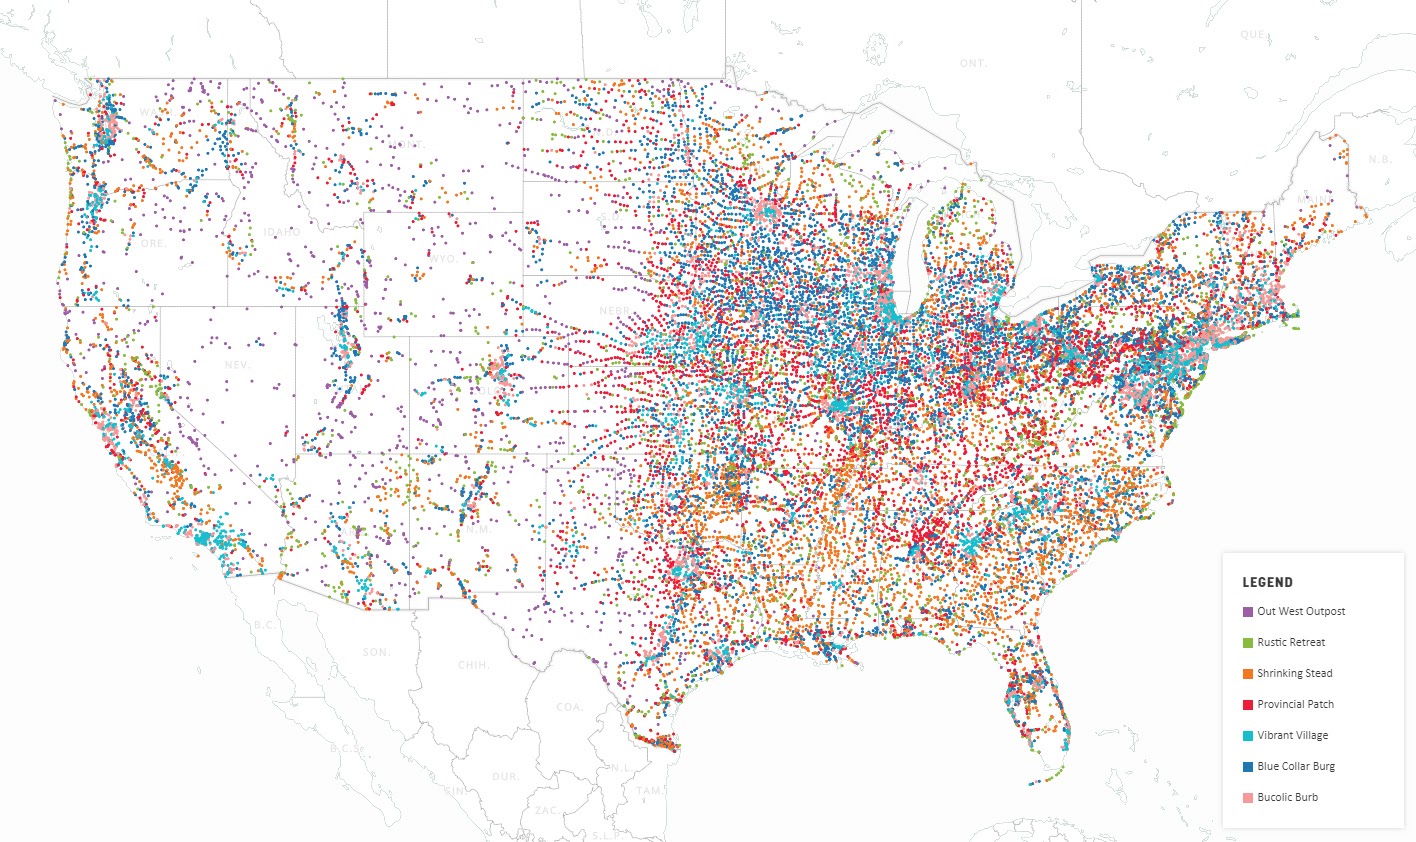 map of united states with plotted data points